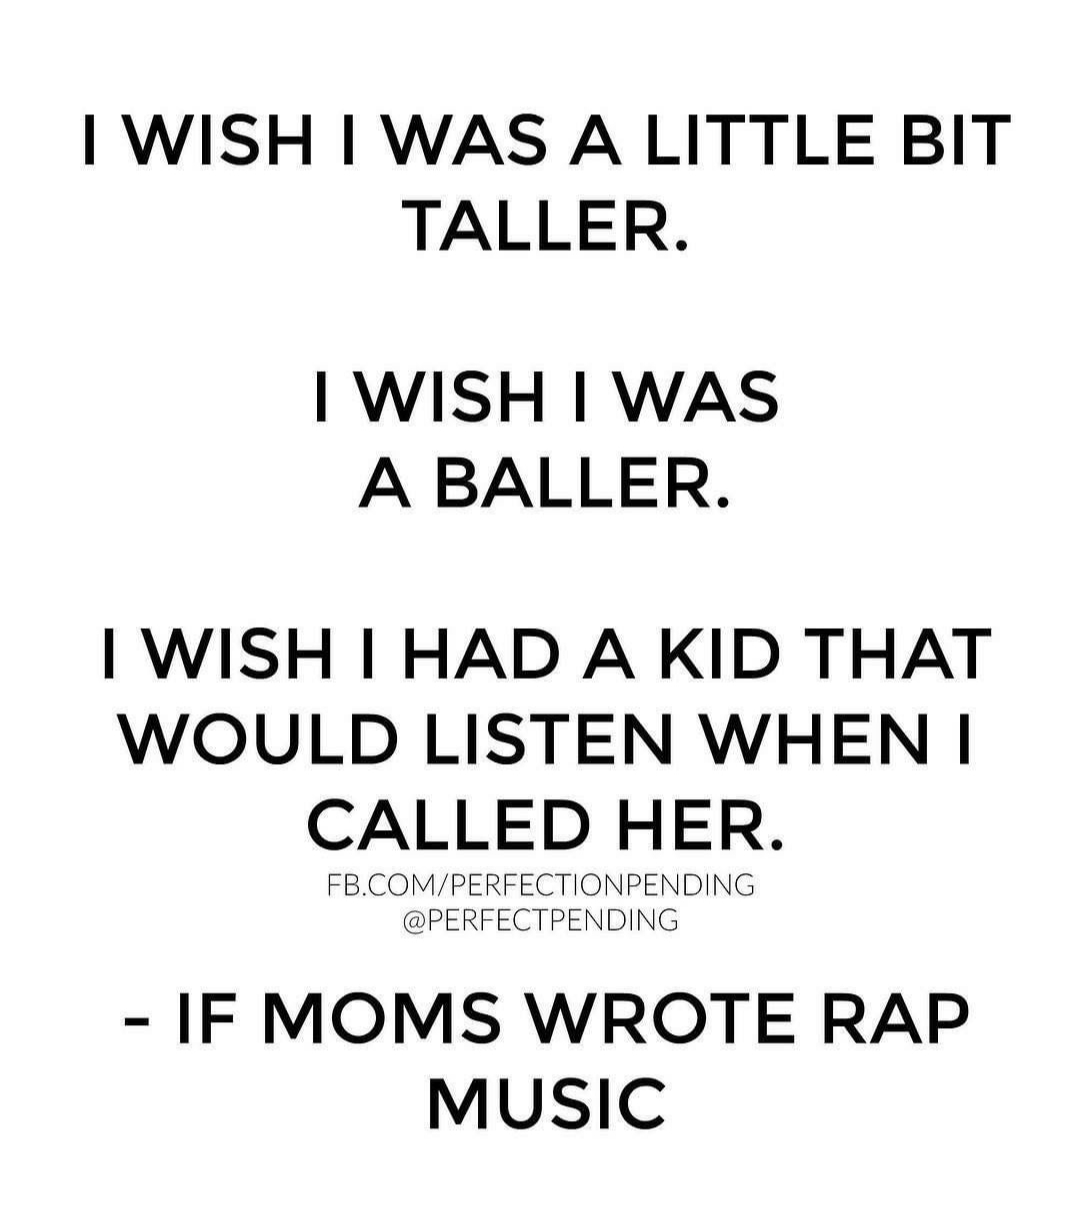 19 Funny Memes For Moms Raised on '90s-2000s Rap and Hip Hop